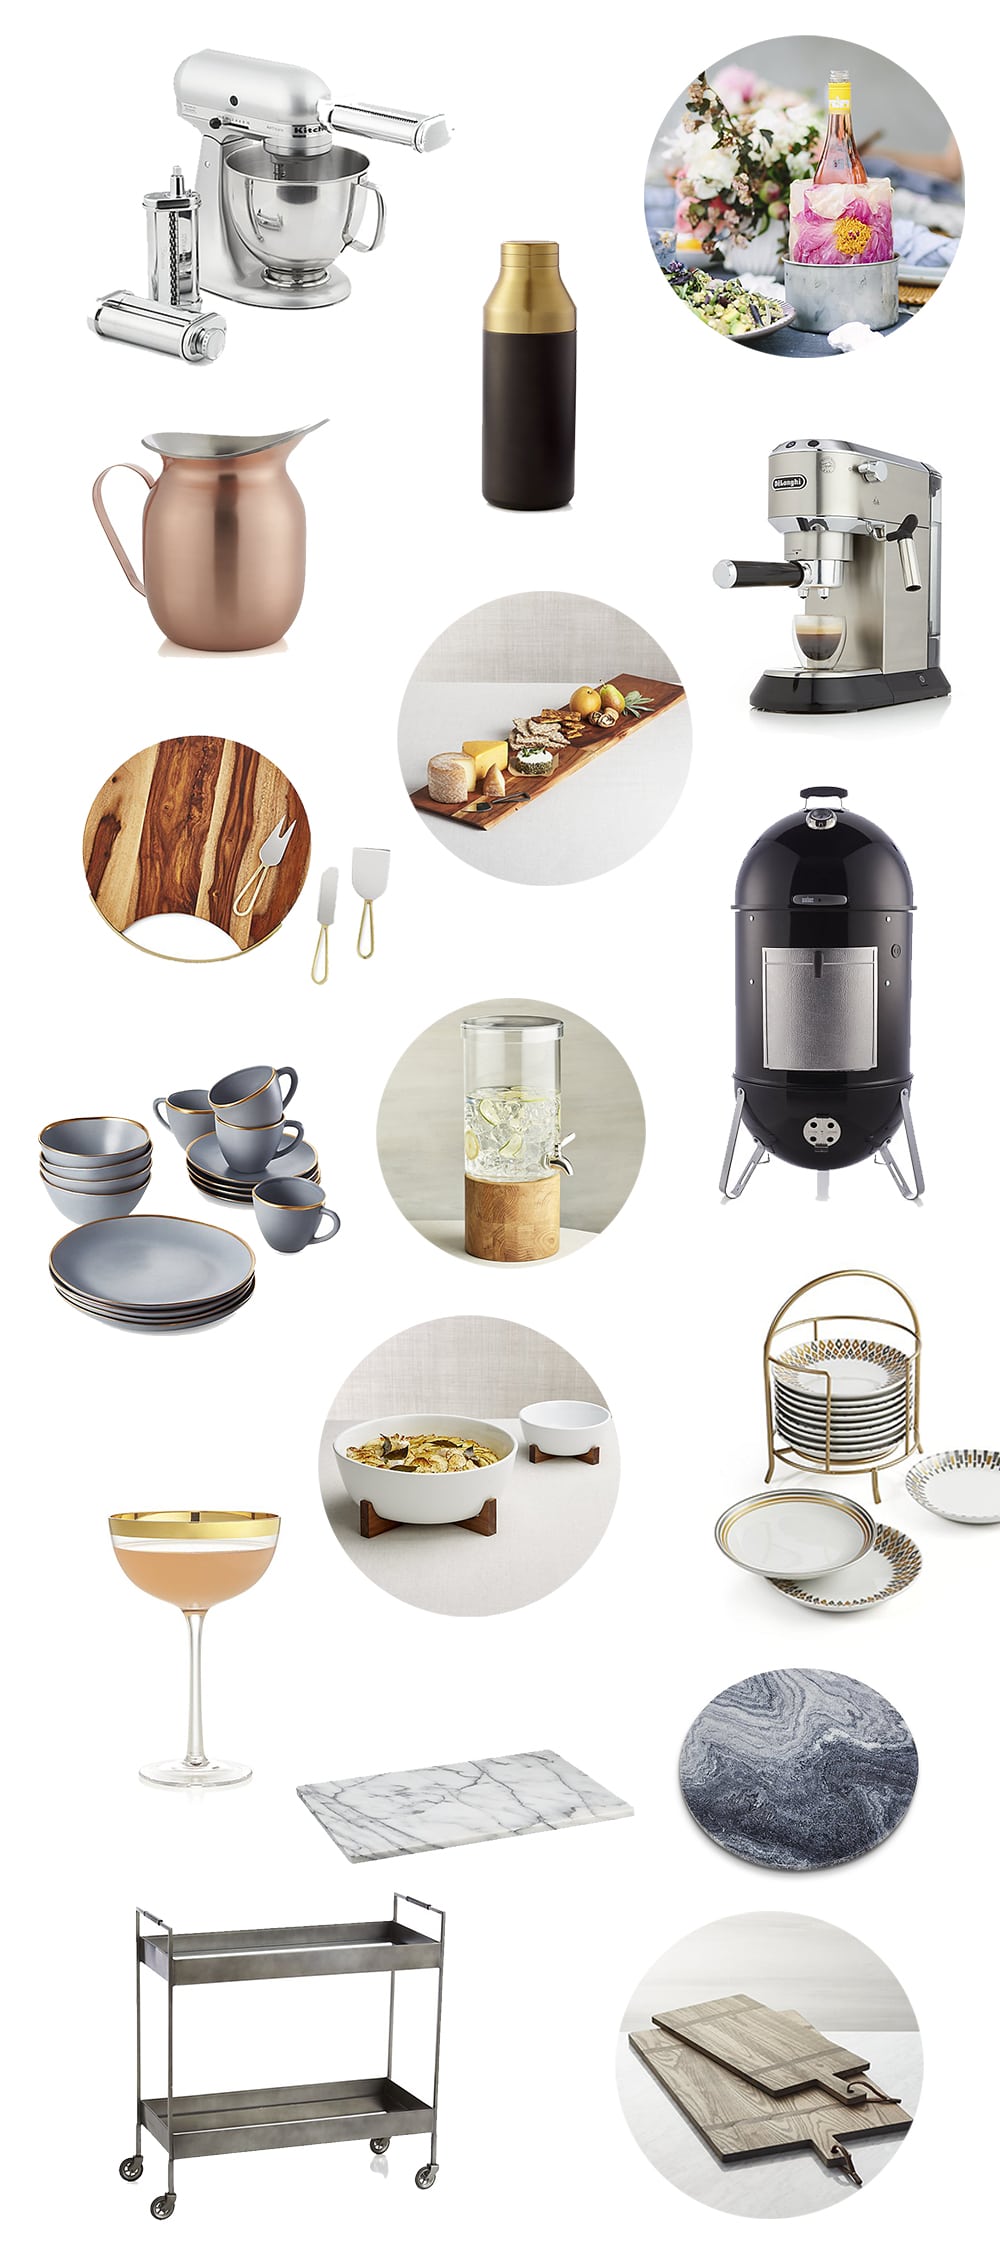 A collection of Crate & Barrel items for an entertaining-focused registry